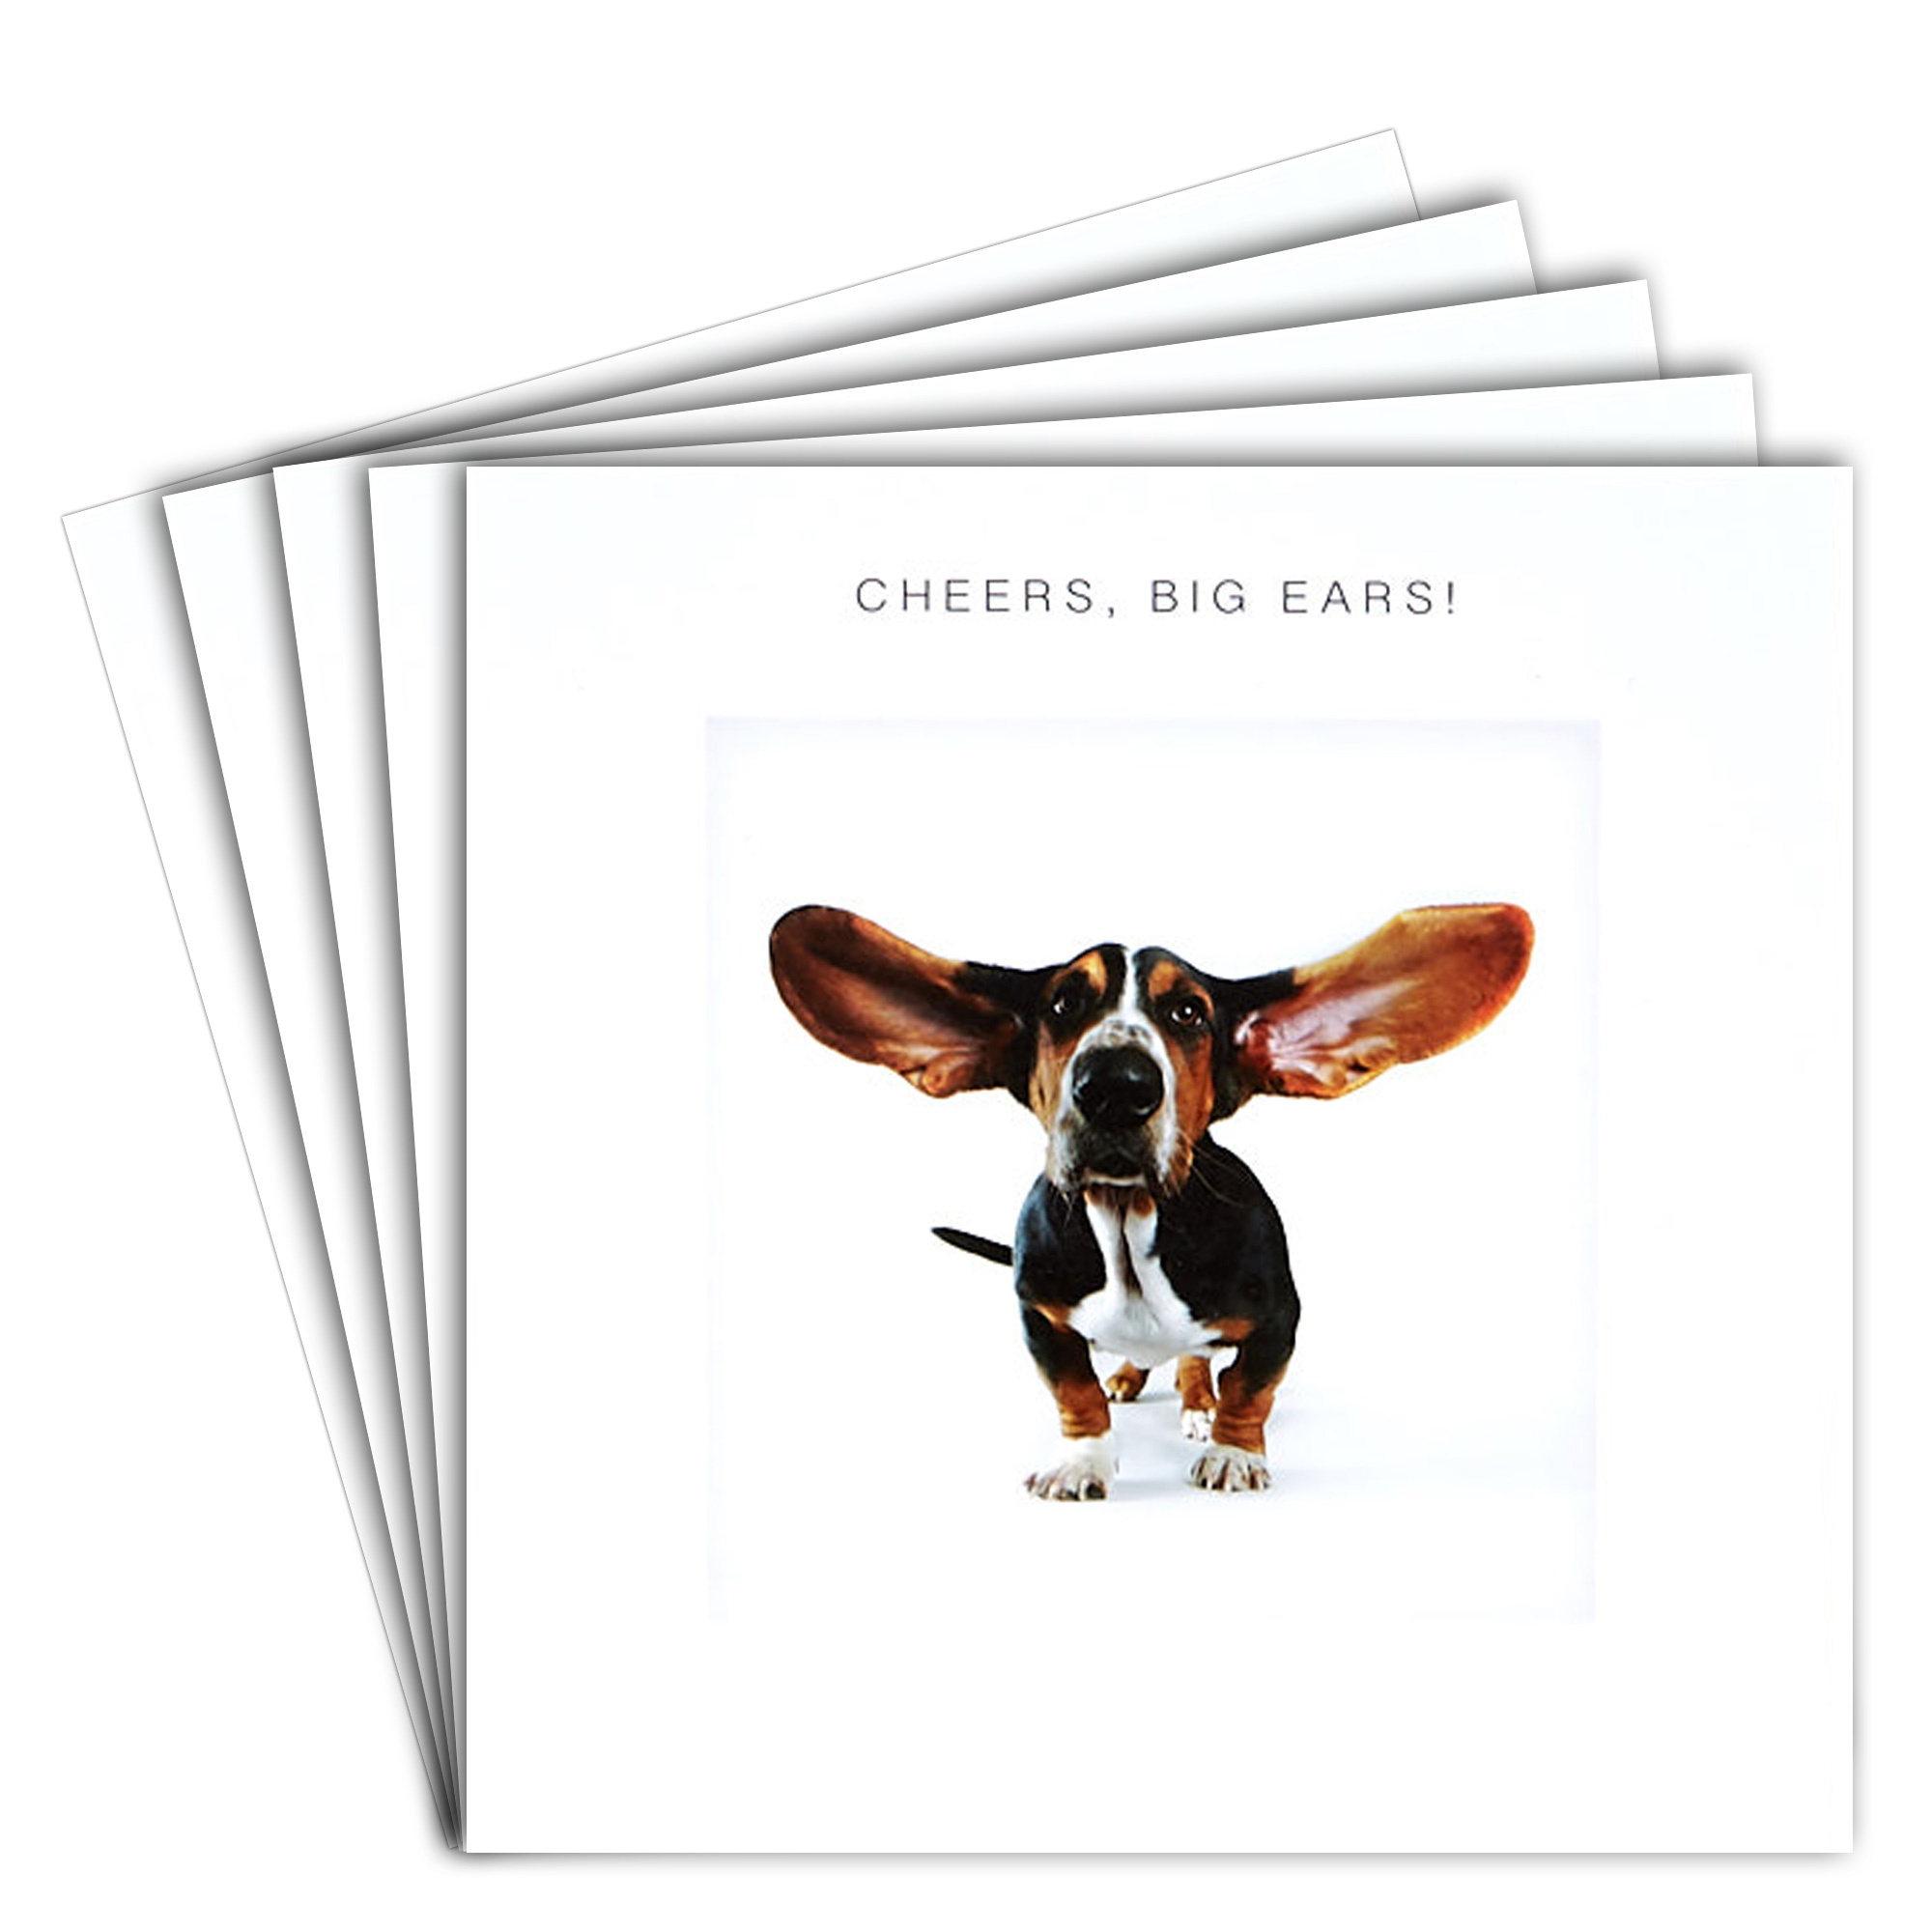 12 Blank Thank You Cards - Cheers Big Ears